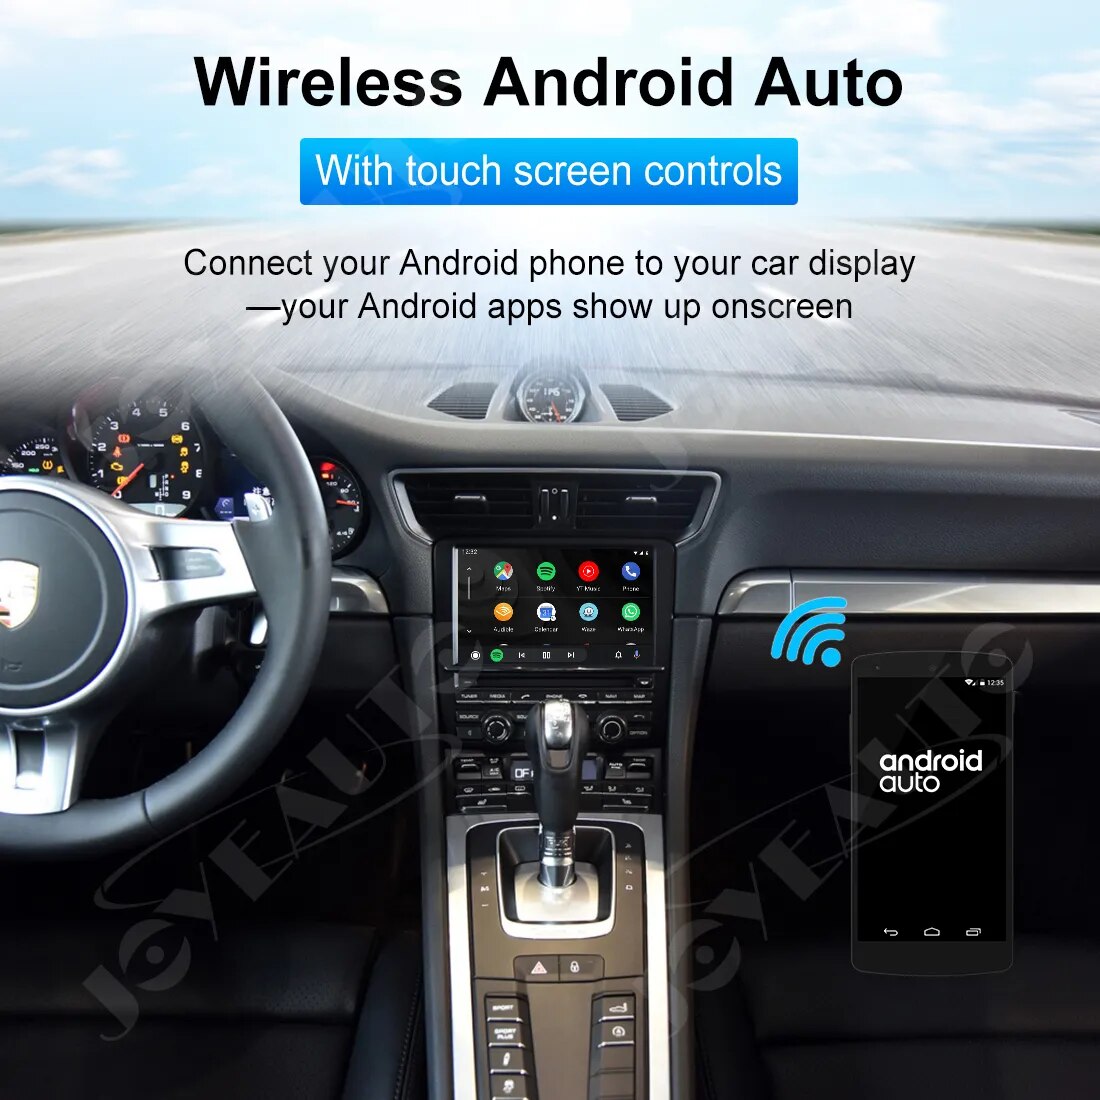 JoyeAuto Wireless Apple CarPlay For Porsche 911 Bosxter Cayman Macan Cayenne Panamera PCM3.1 CDR3.1 PCM4.0 Android Auto Car Play